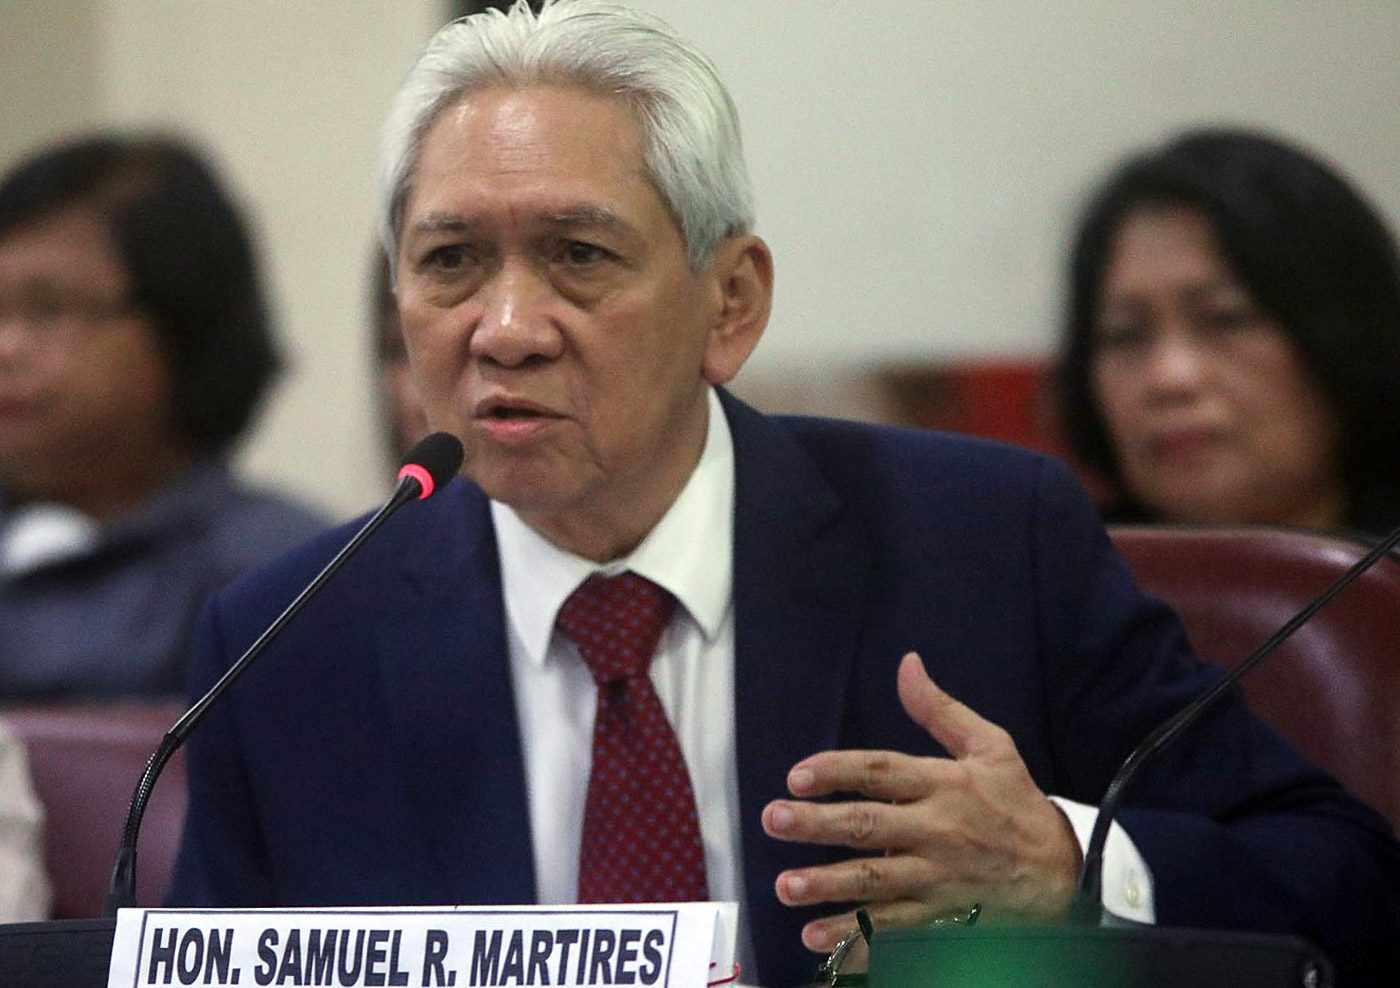 Martires to junk all cases that take over a year at fact finding